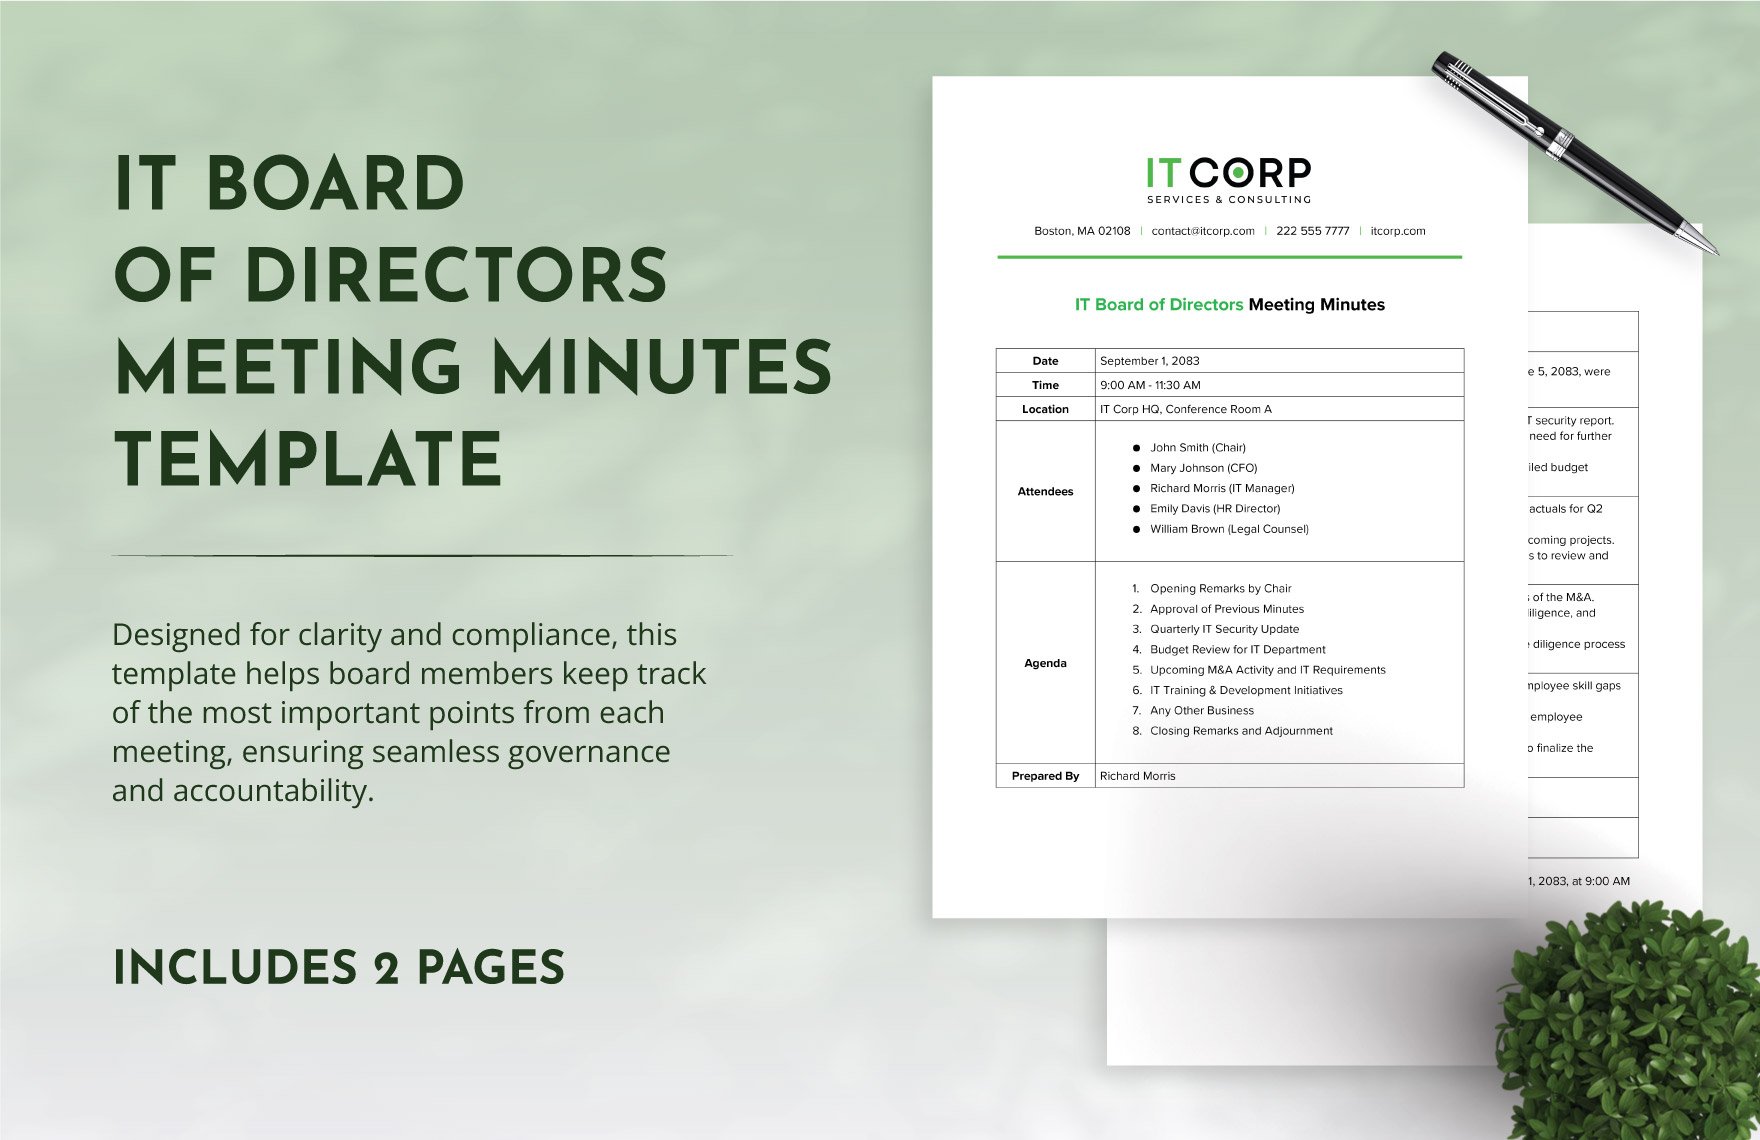 IT Board of Directors Meeting Minutes Template